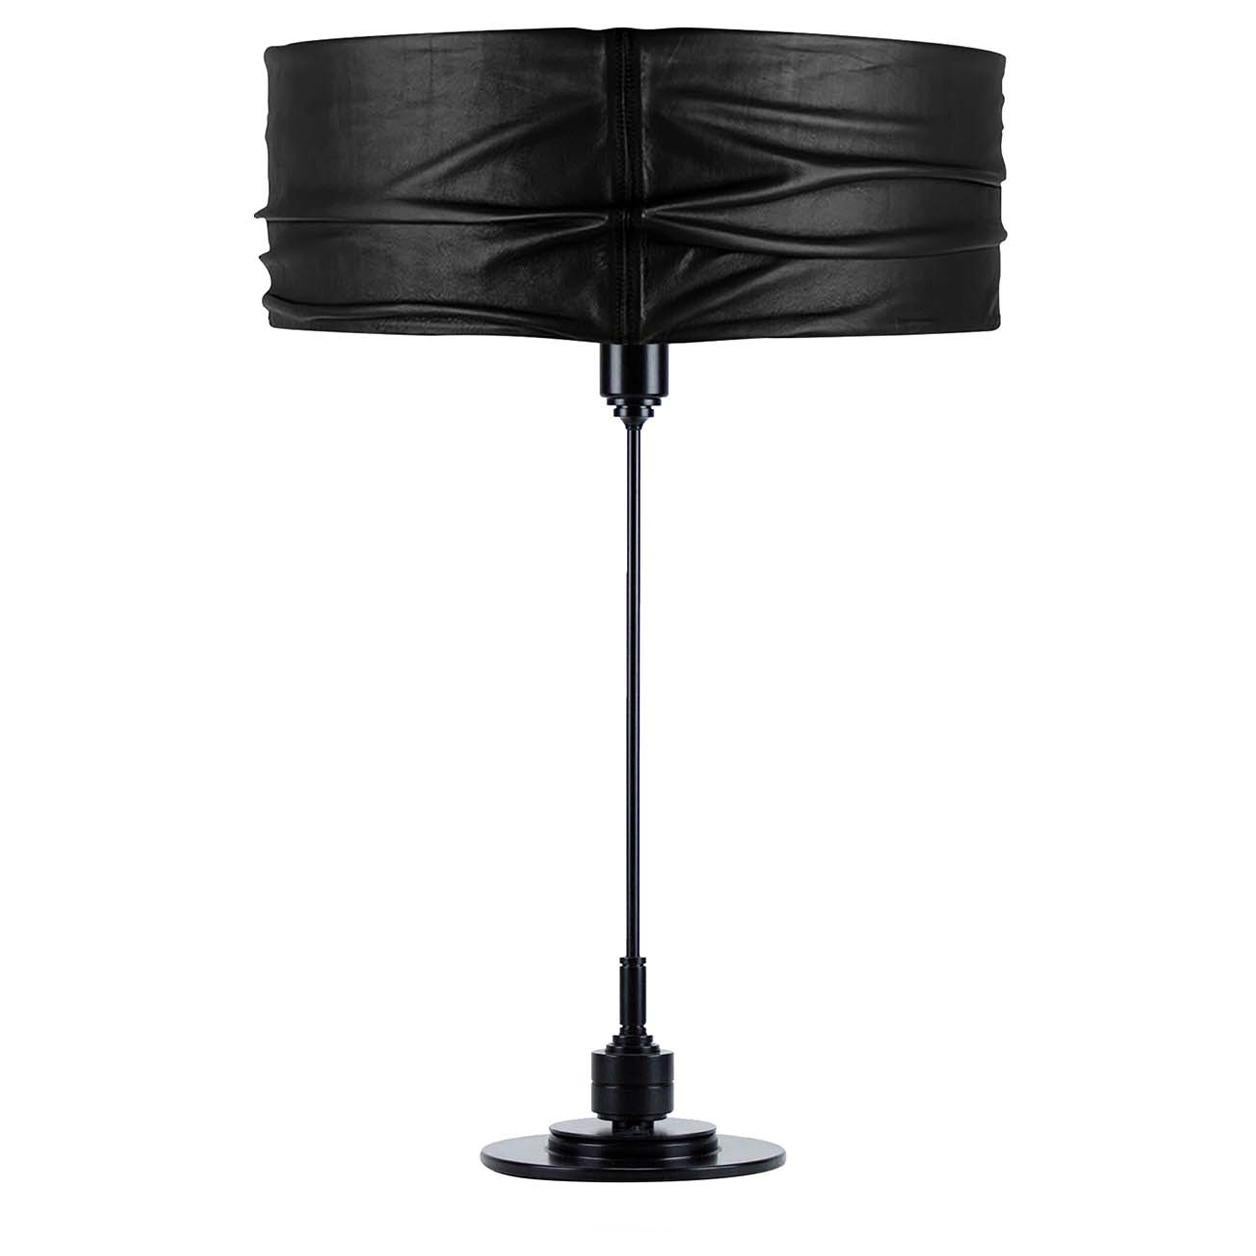 Semele Black Table Lamp #1 by Acanthus